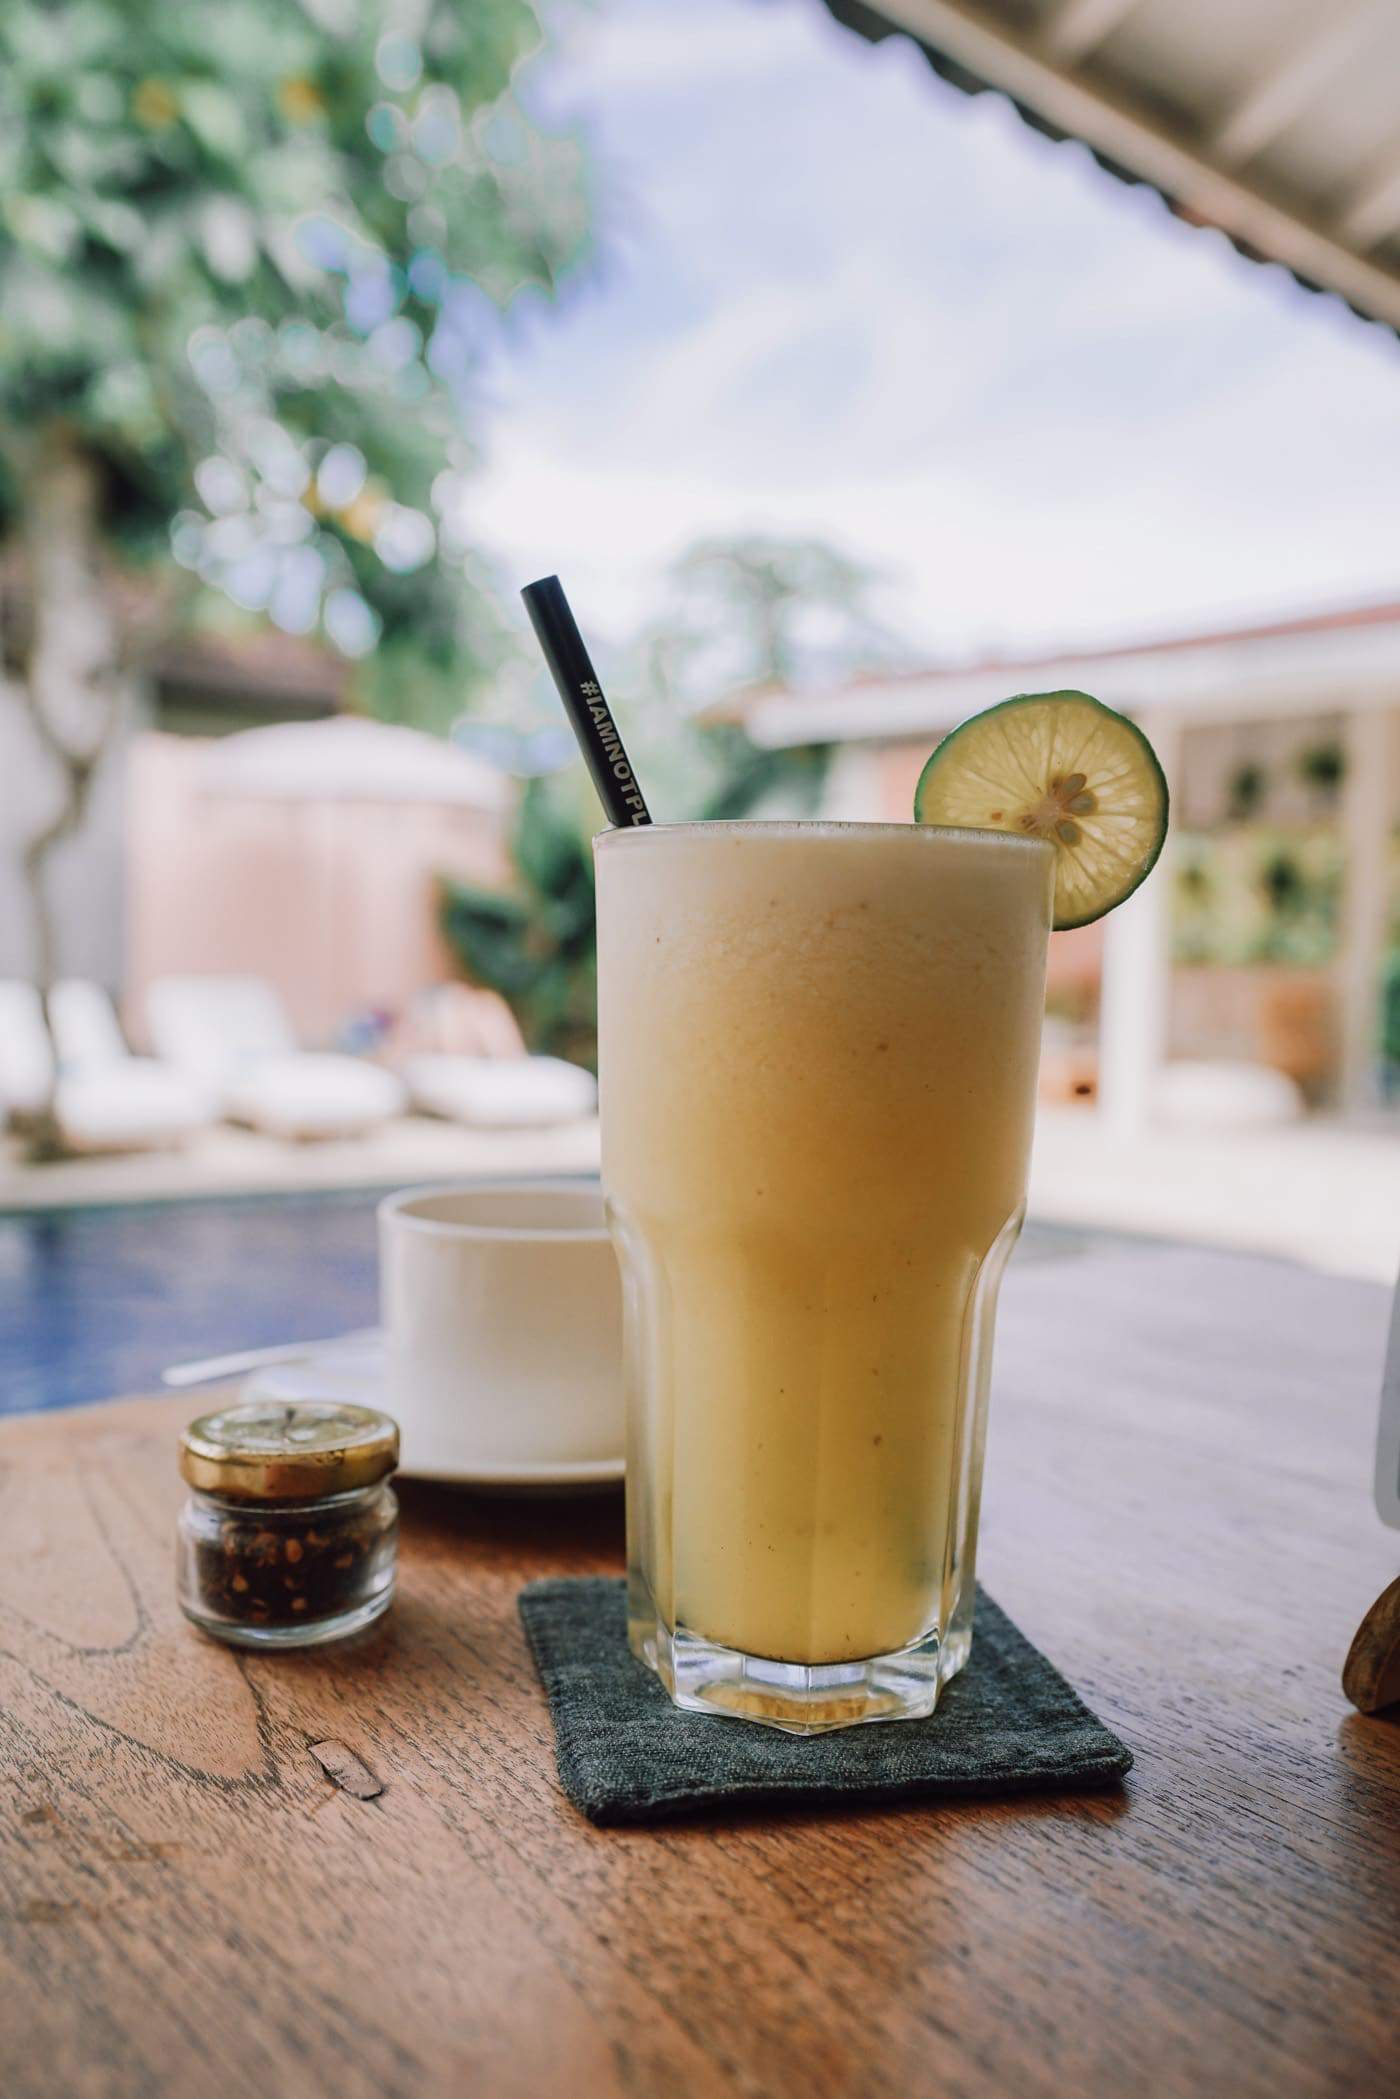 Looking for the best place to stay in Canggu? Looking for great Bali food and an amazing yoga retreat in Bali? Look no further than The Chillhouse Bali and Cassava Poolside café | Travel Bali | Travel Canggu #travelbali #bali #thechillhouse #yogaretreat #baliyoga